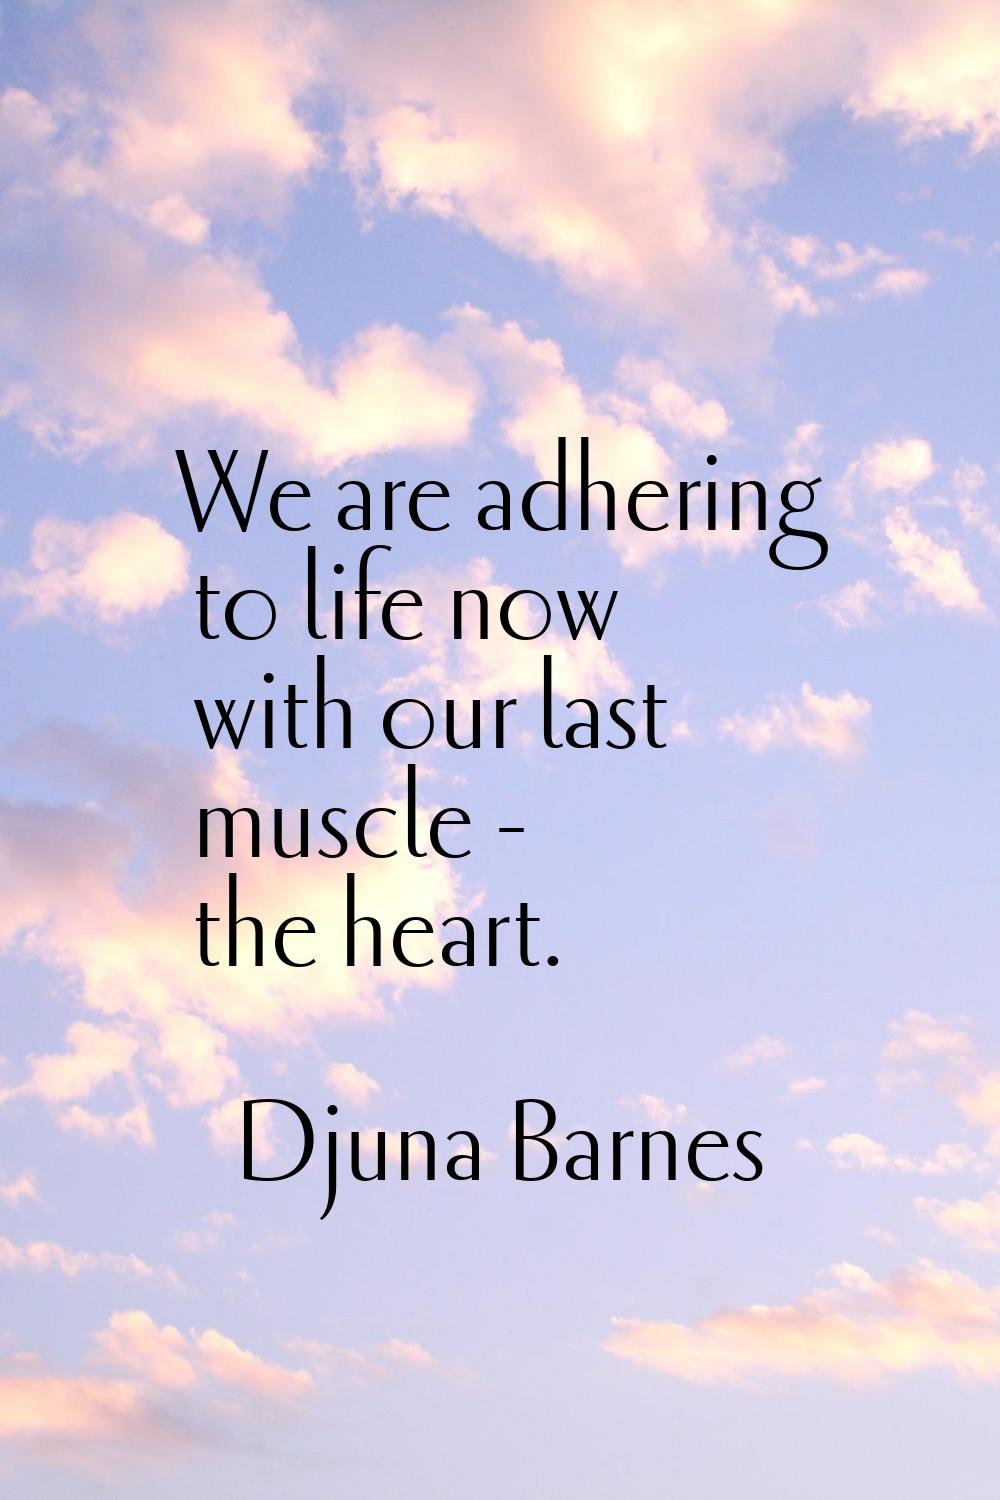 We are adhering to life now with our last muscle - the heart.